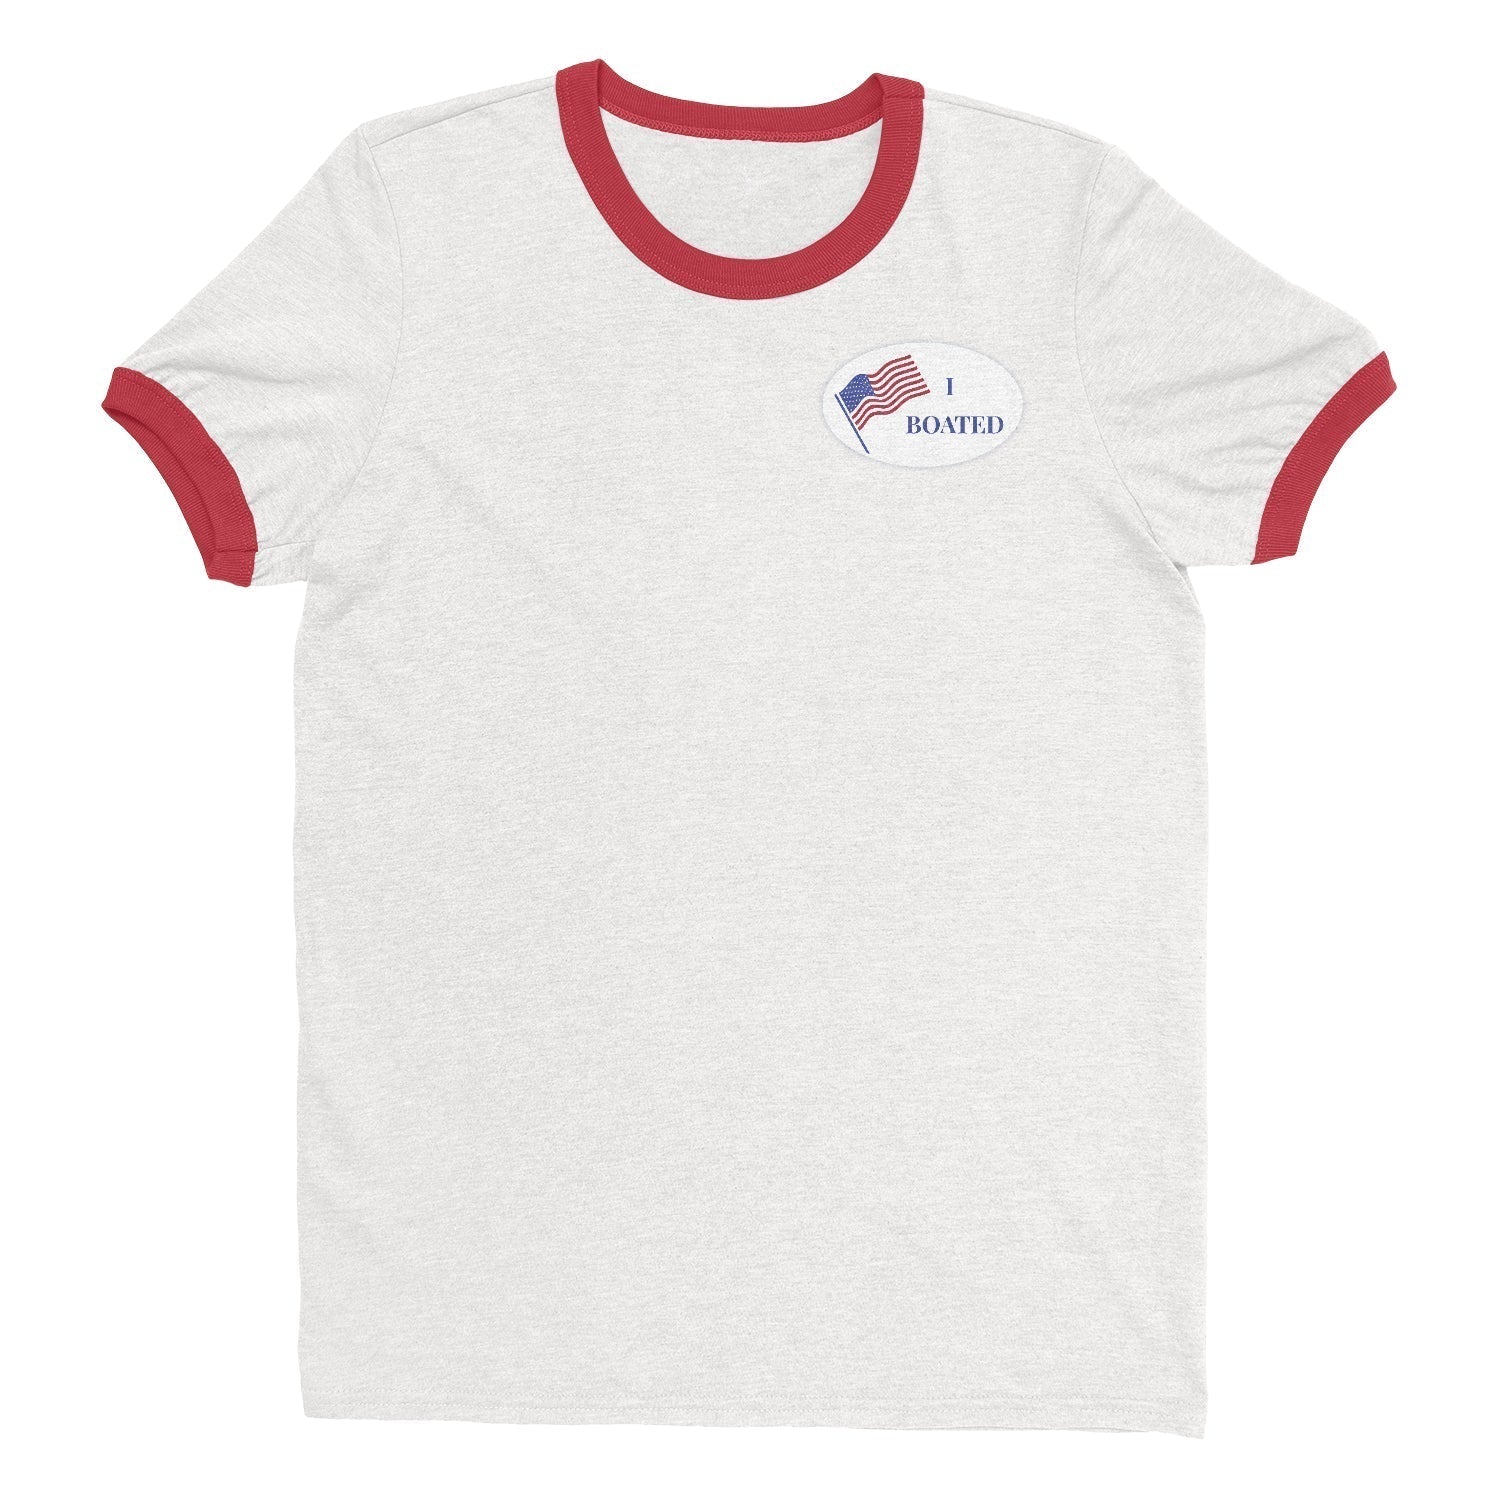 Cheers Beaches Apparel & Accessories Small / White / Red "I Boated" Ringer Tee: Red